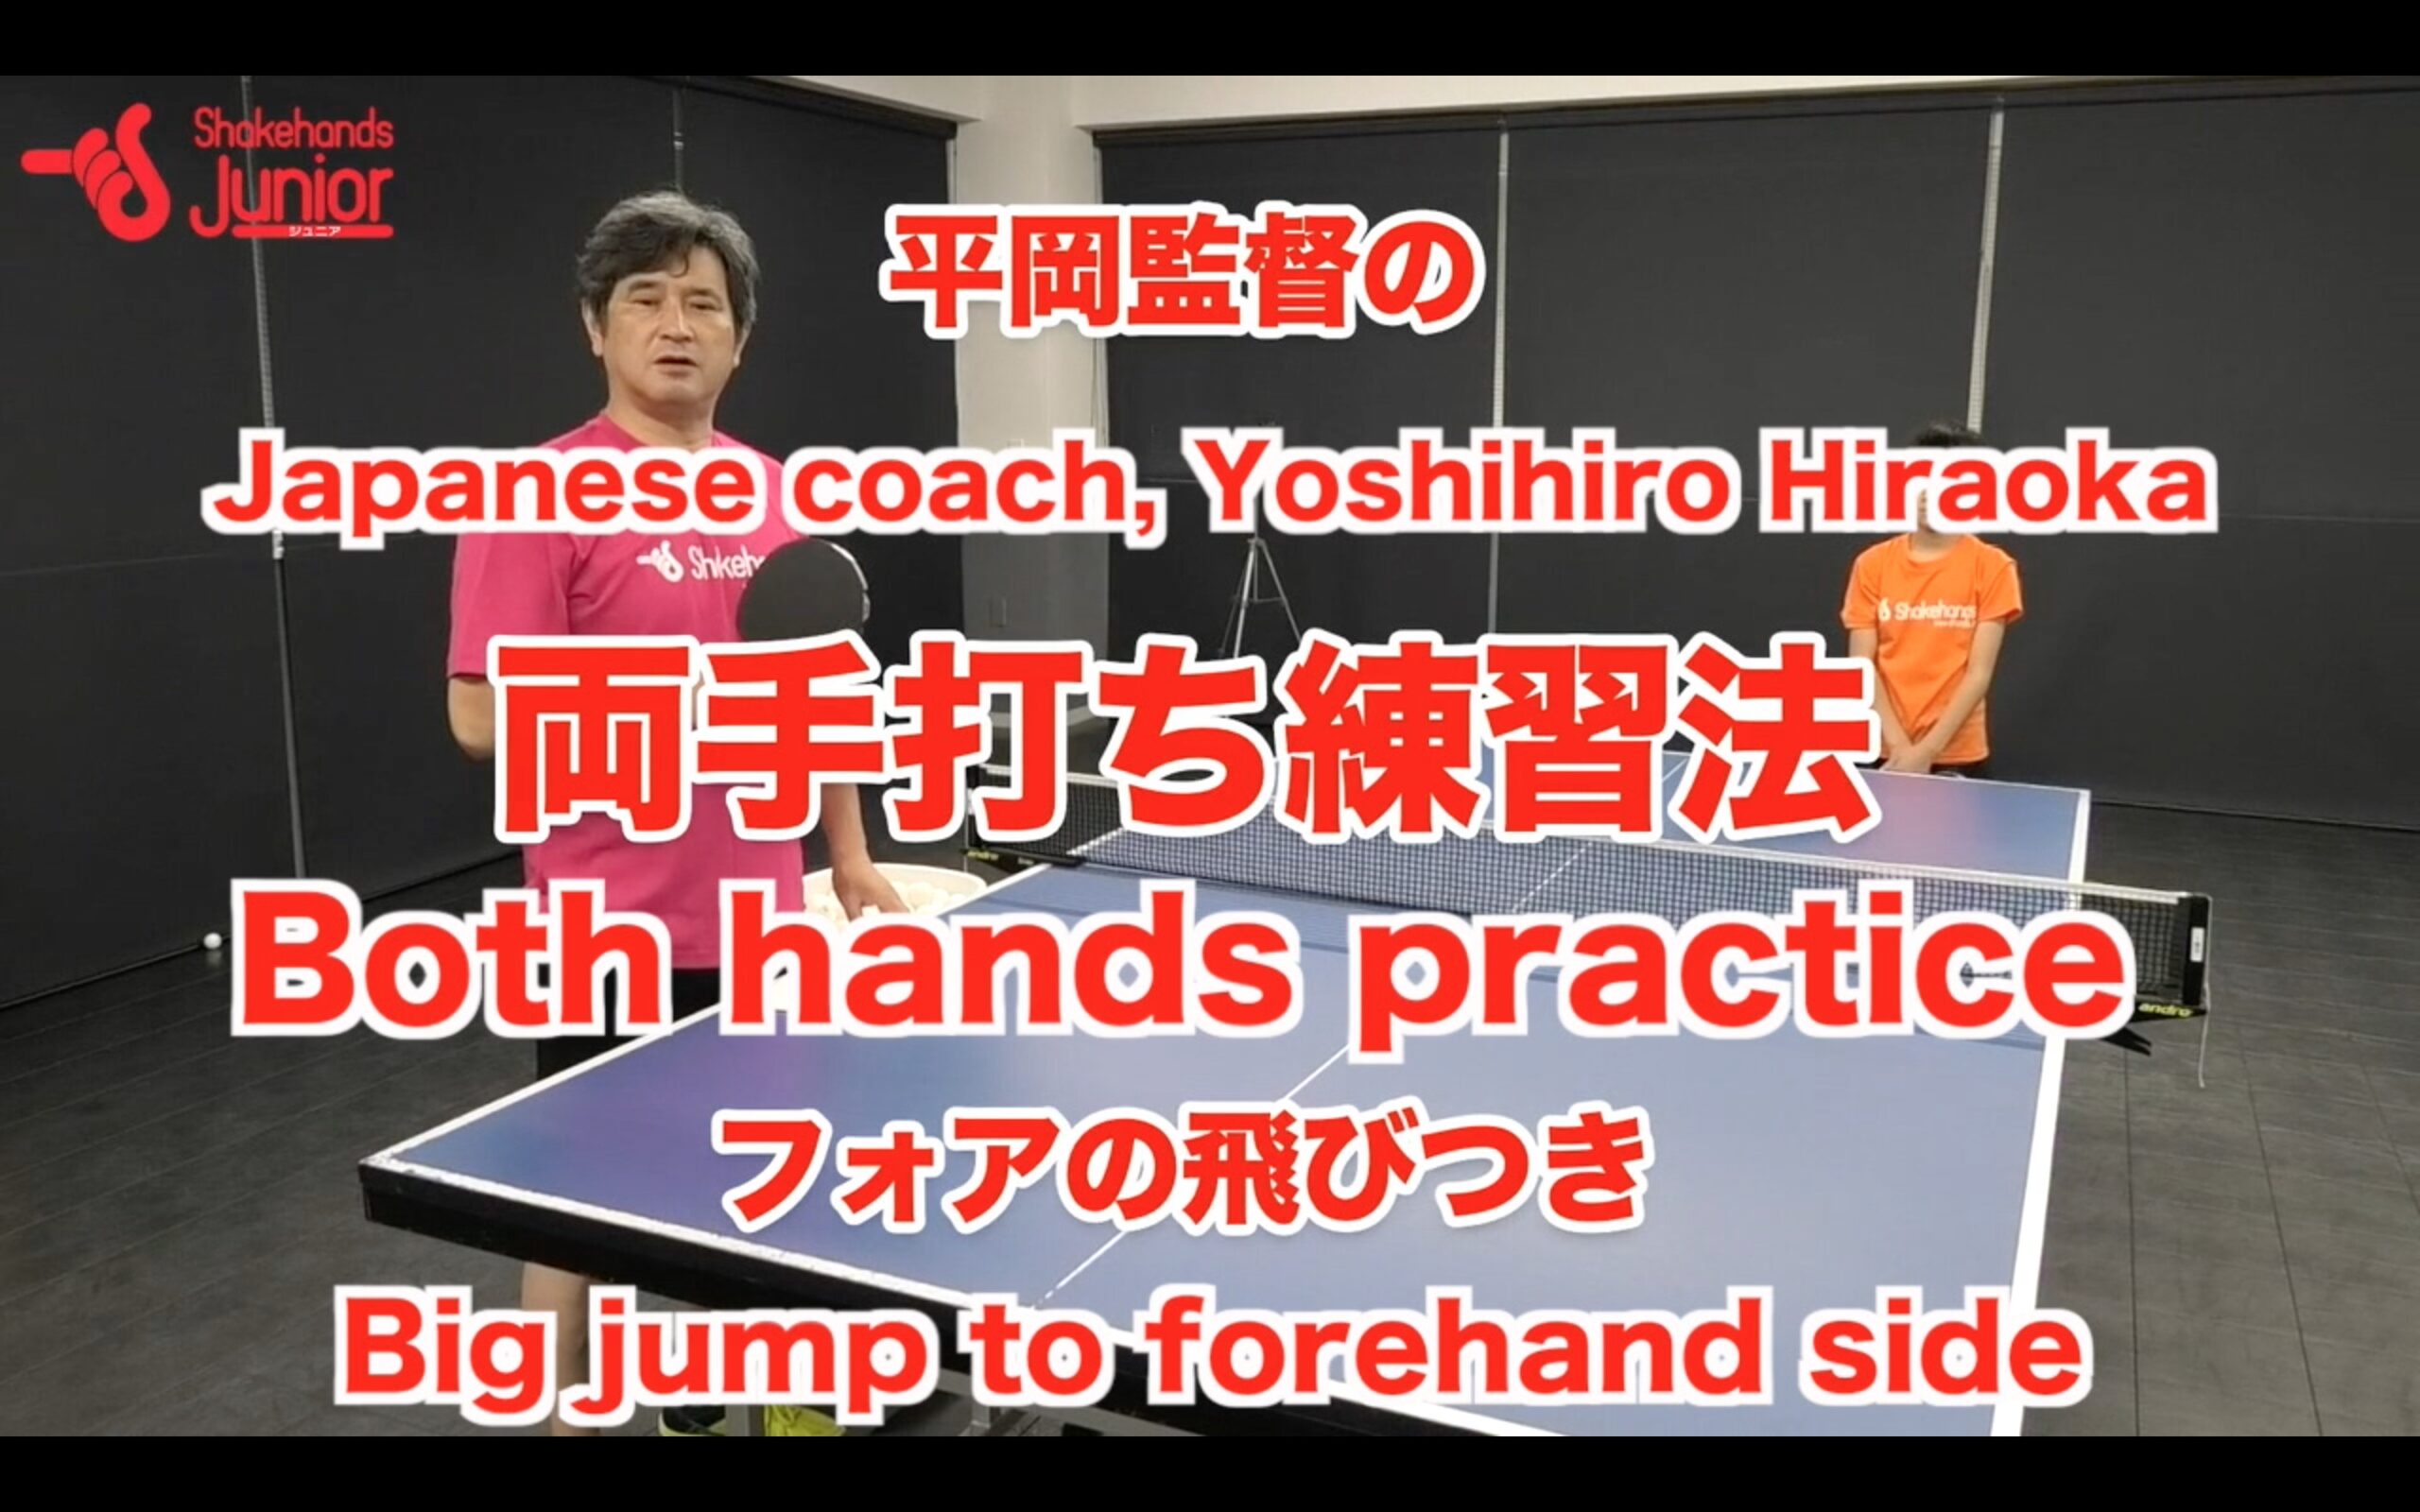 Both hands practice Big jump to forehand side